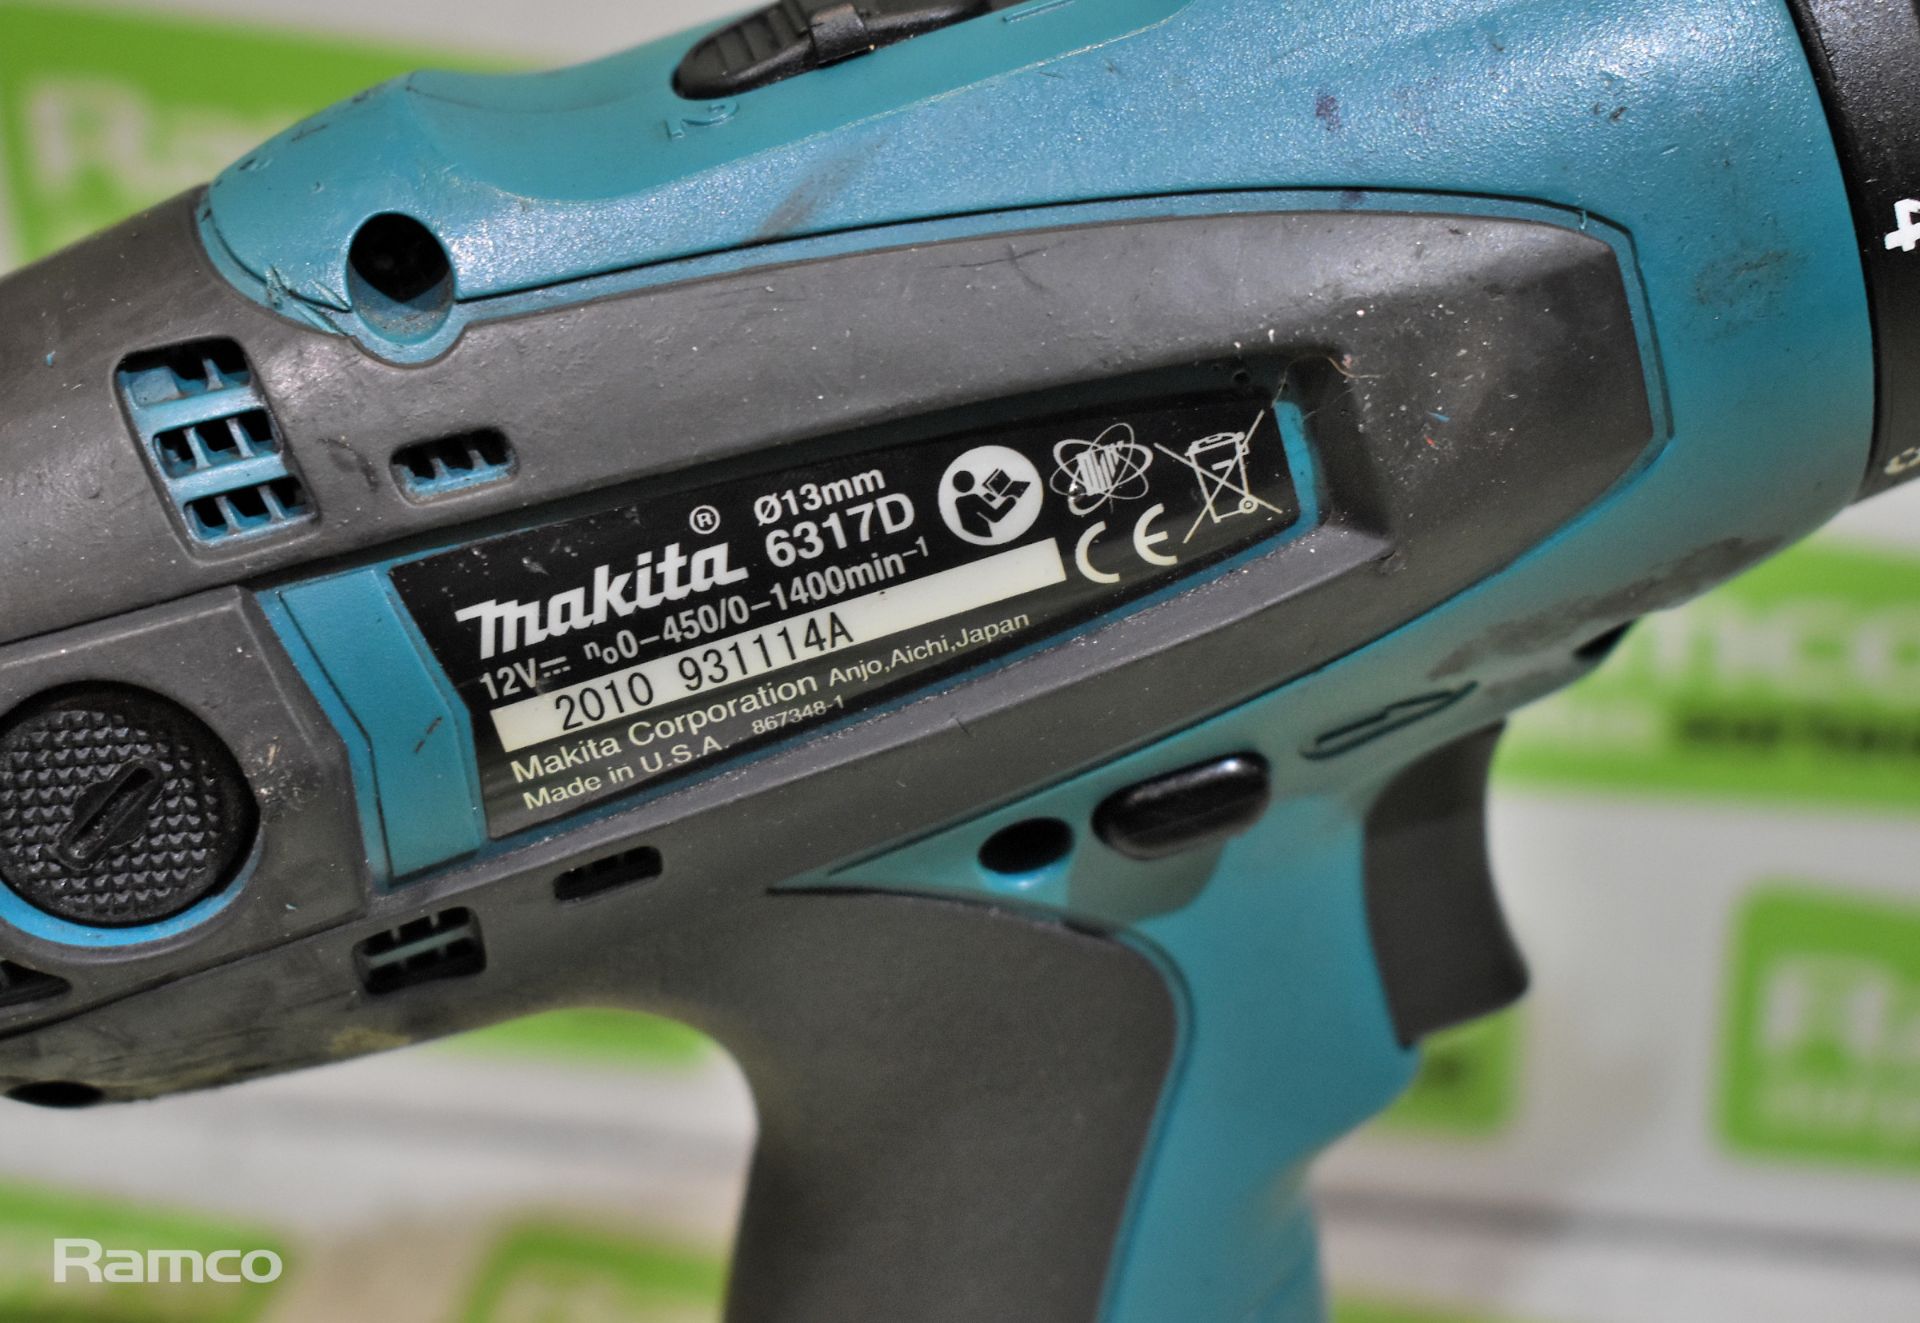 2x Makita 6317D cordless drills - DC1414T charger - 1x 12V battery - case - Image 4 of 7